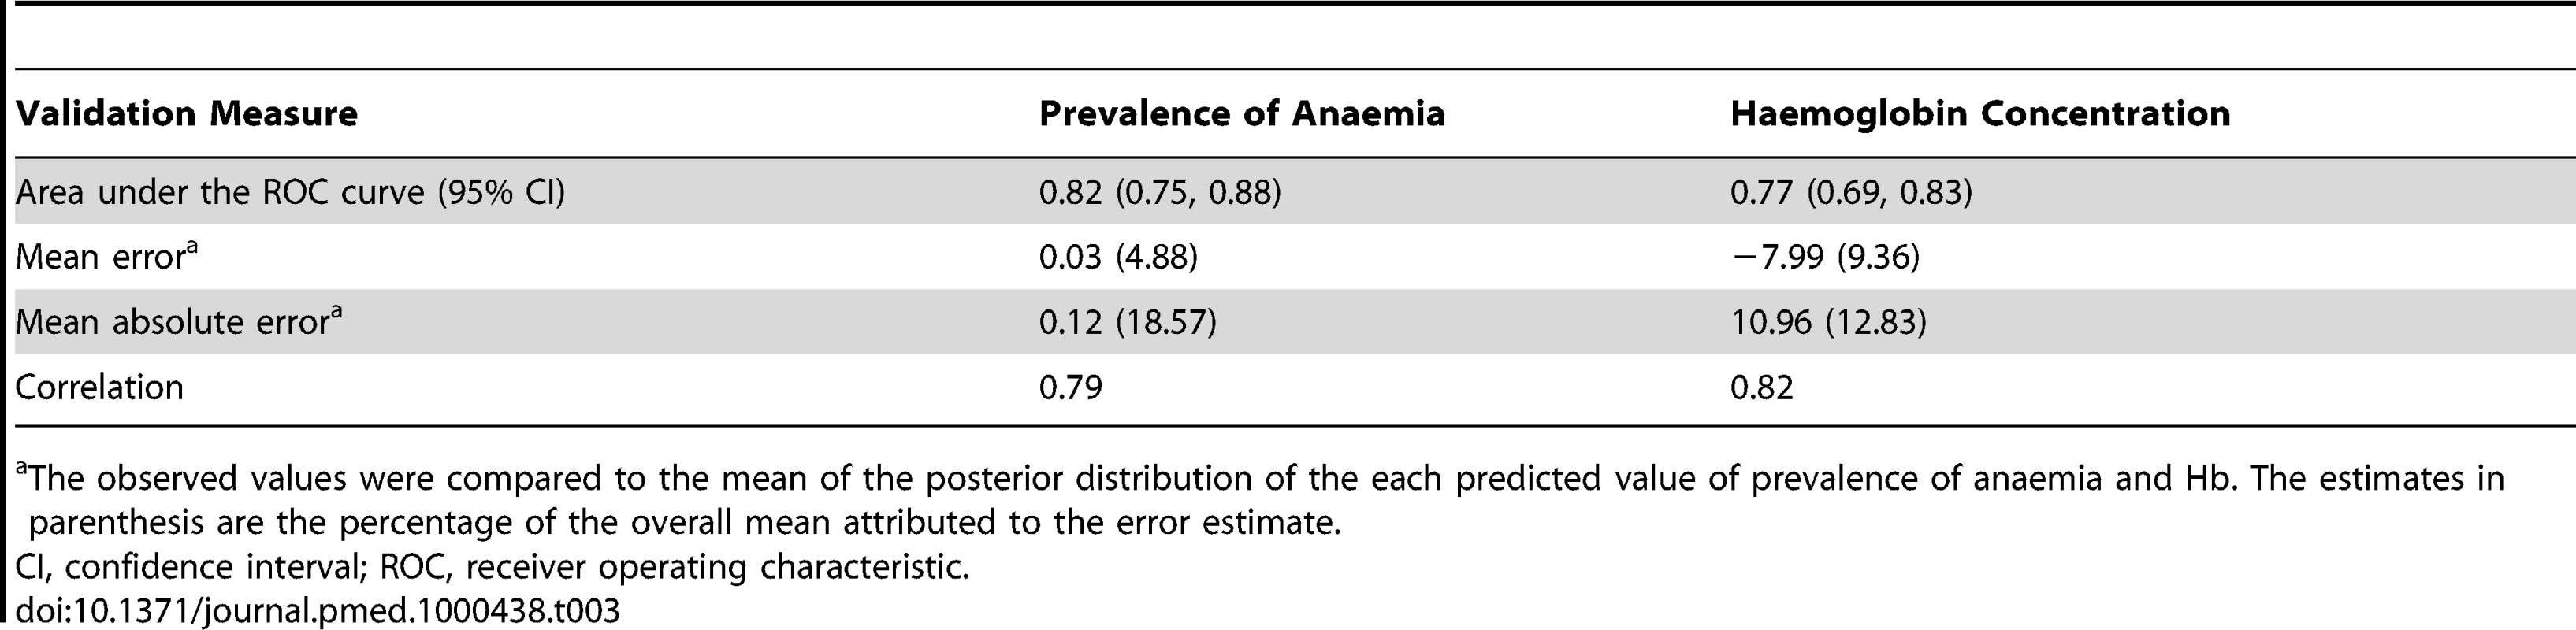 Summary of validation statistics for predictive models of anaemia prevalence and haemoglobin concentration in Burkina Faso, Ghana, and Mali.